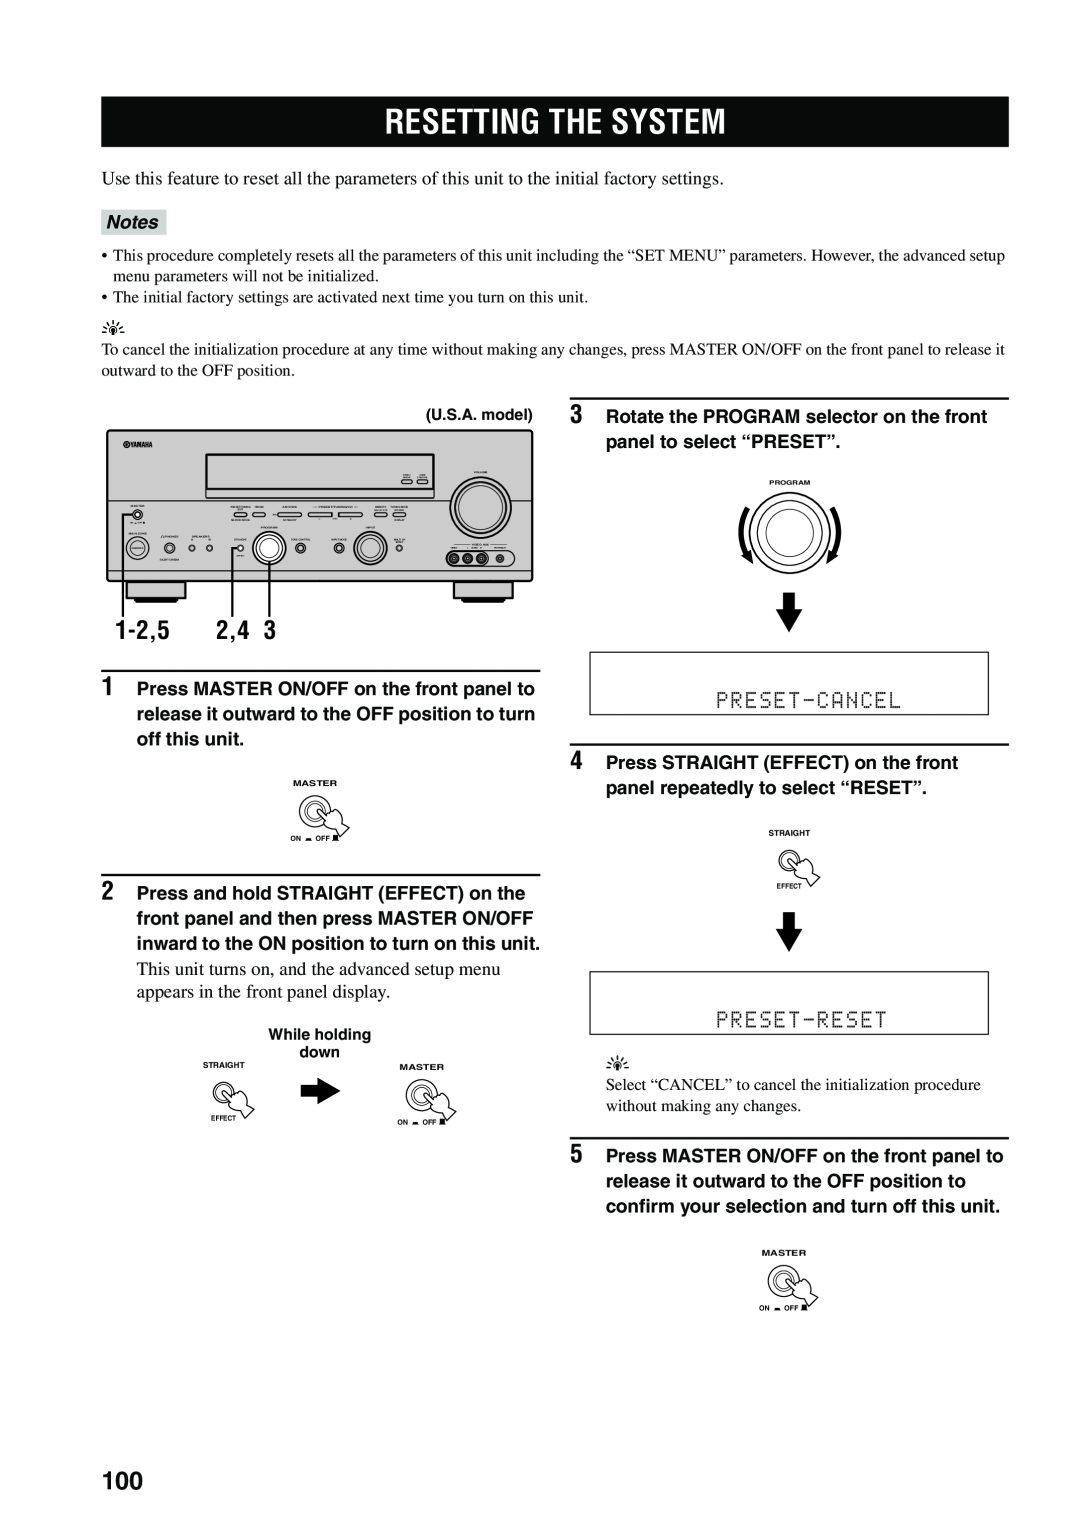 Yamaha RX-V559 owner manual Resetting The System, 1-2,5, Preset-Cancel, Preset-Reset, Notes 